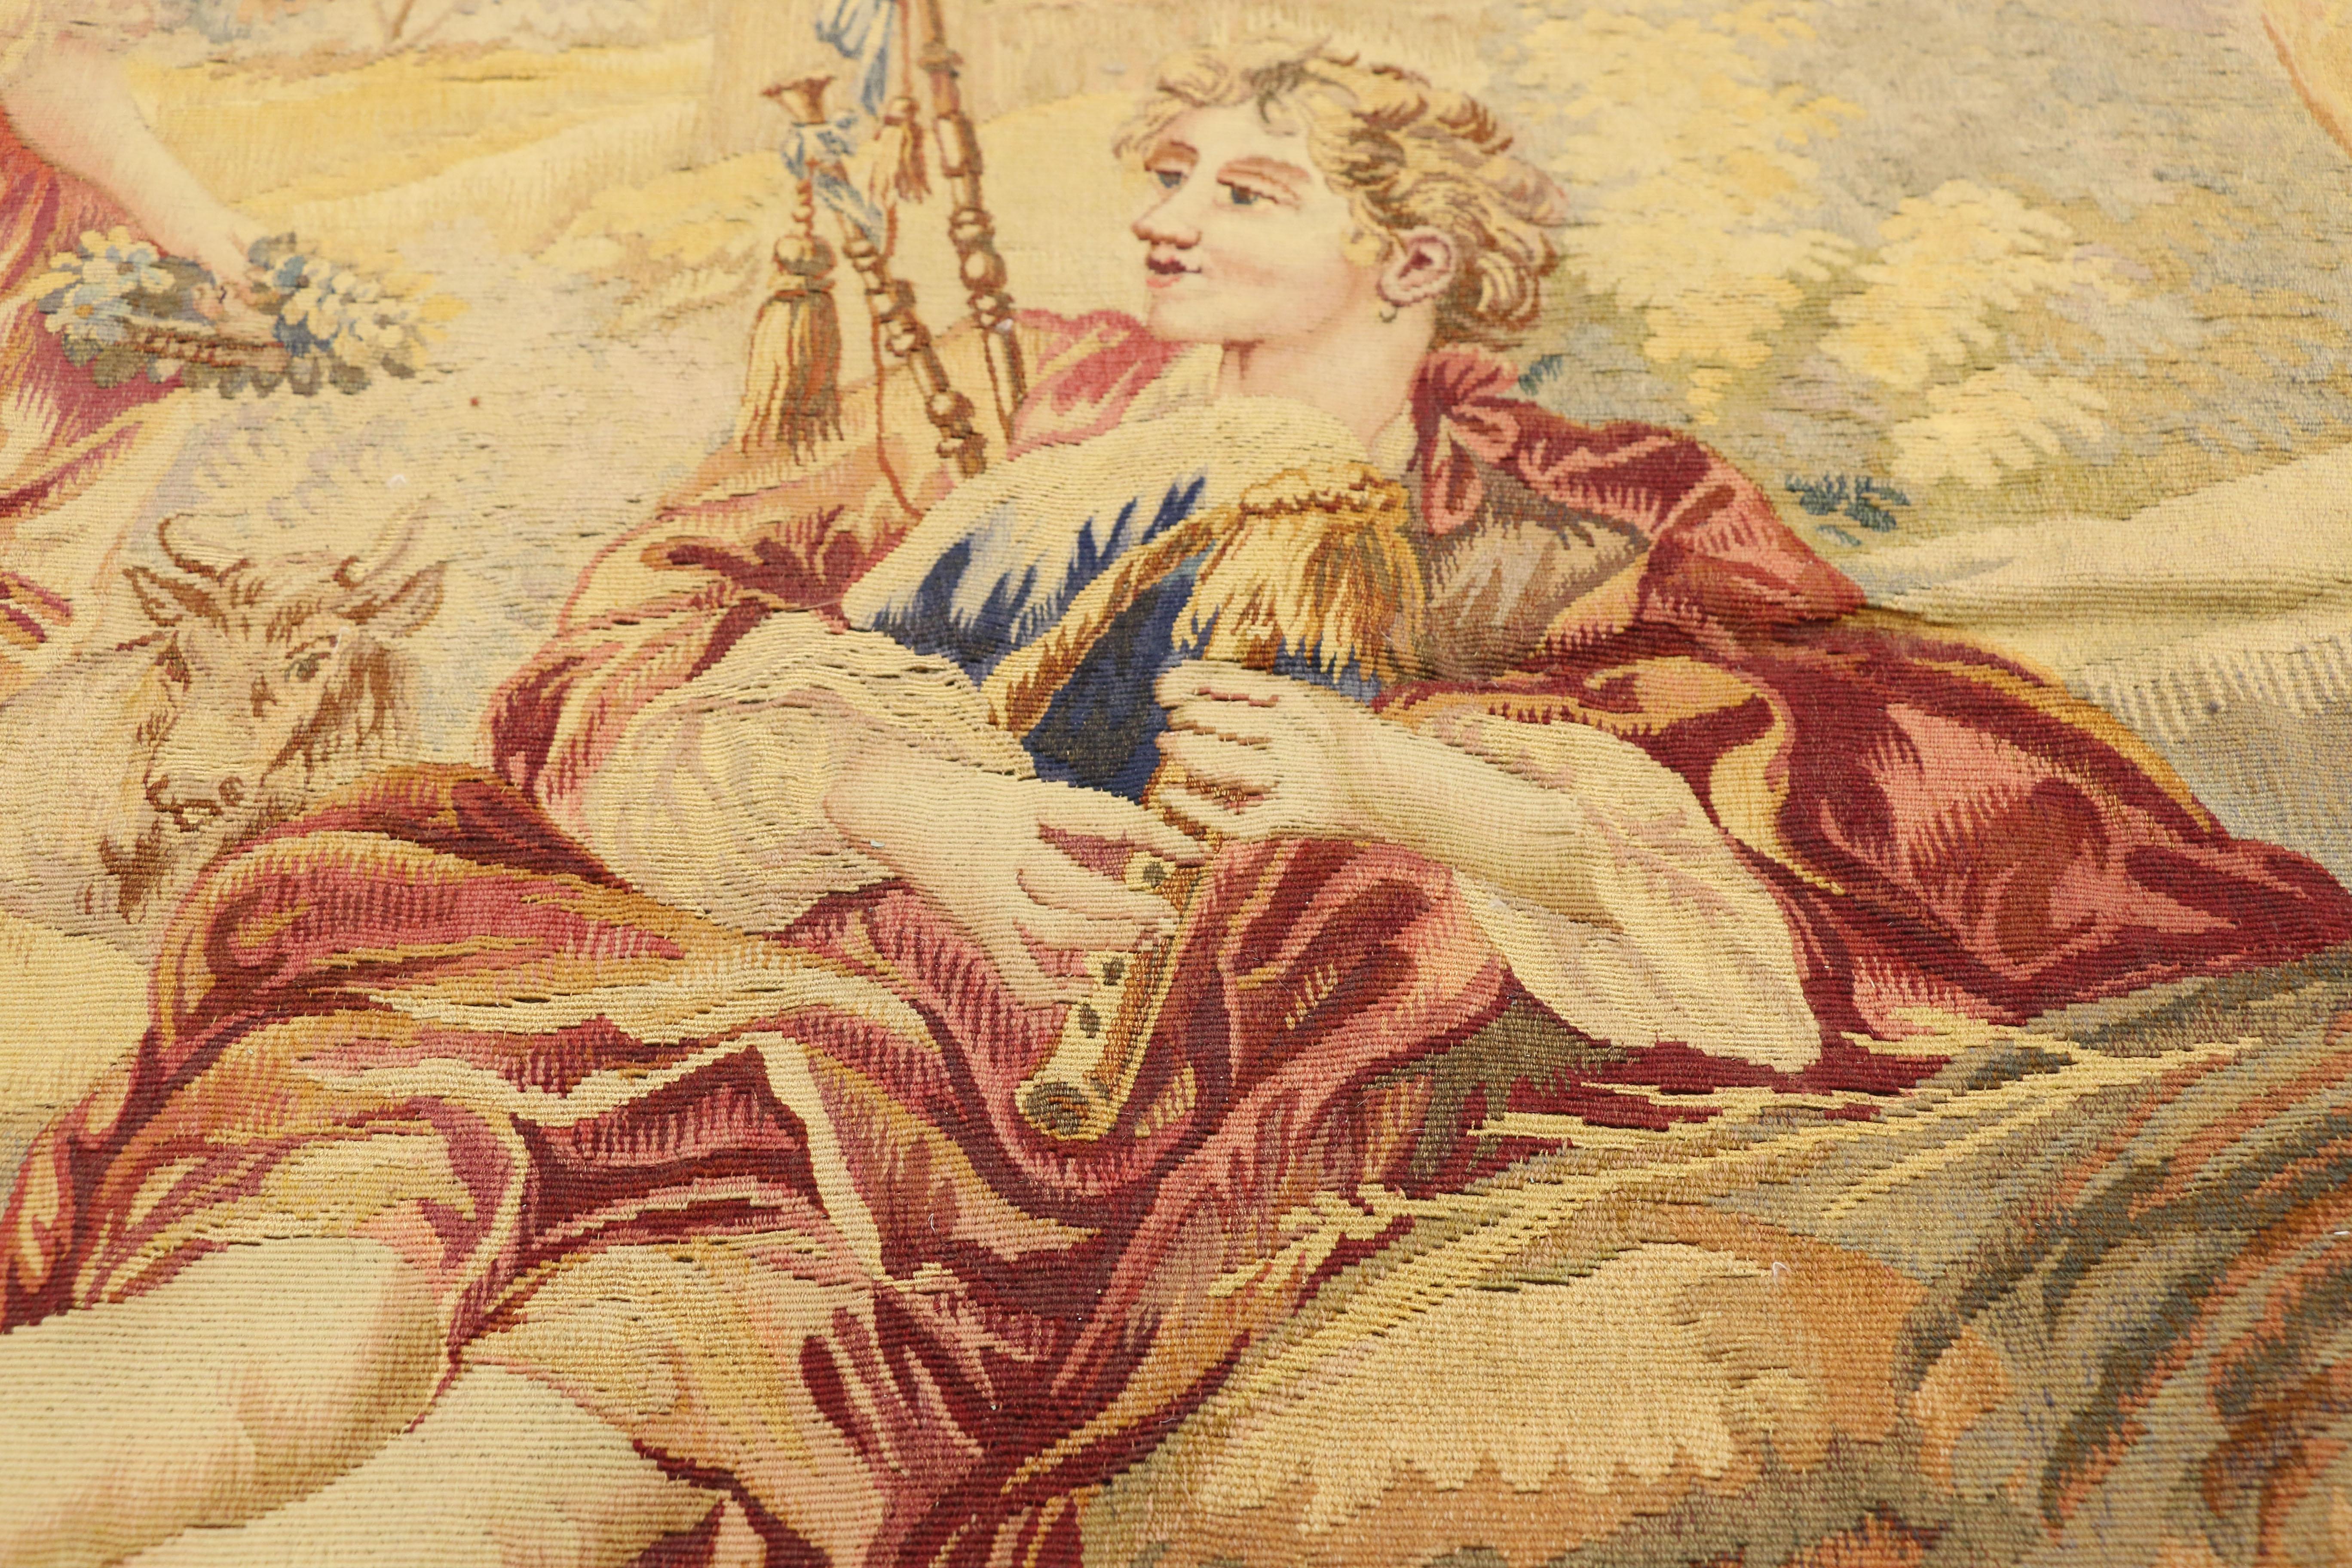 Hand-Woven Antique French Tapestry Inspired by Francois Boucher, Le Berger Recompensé